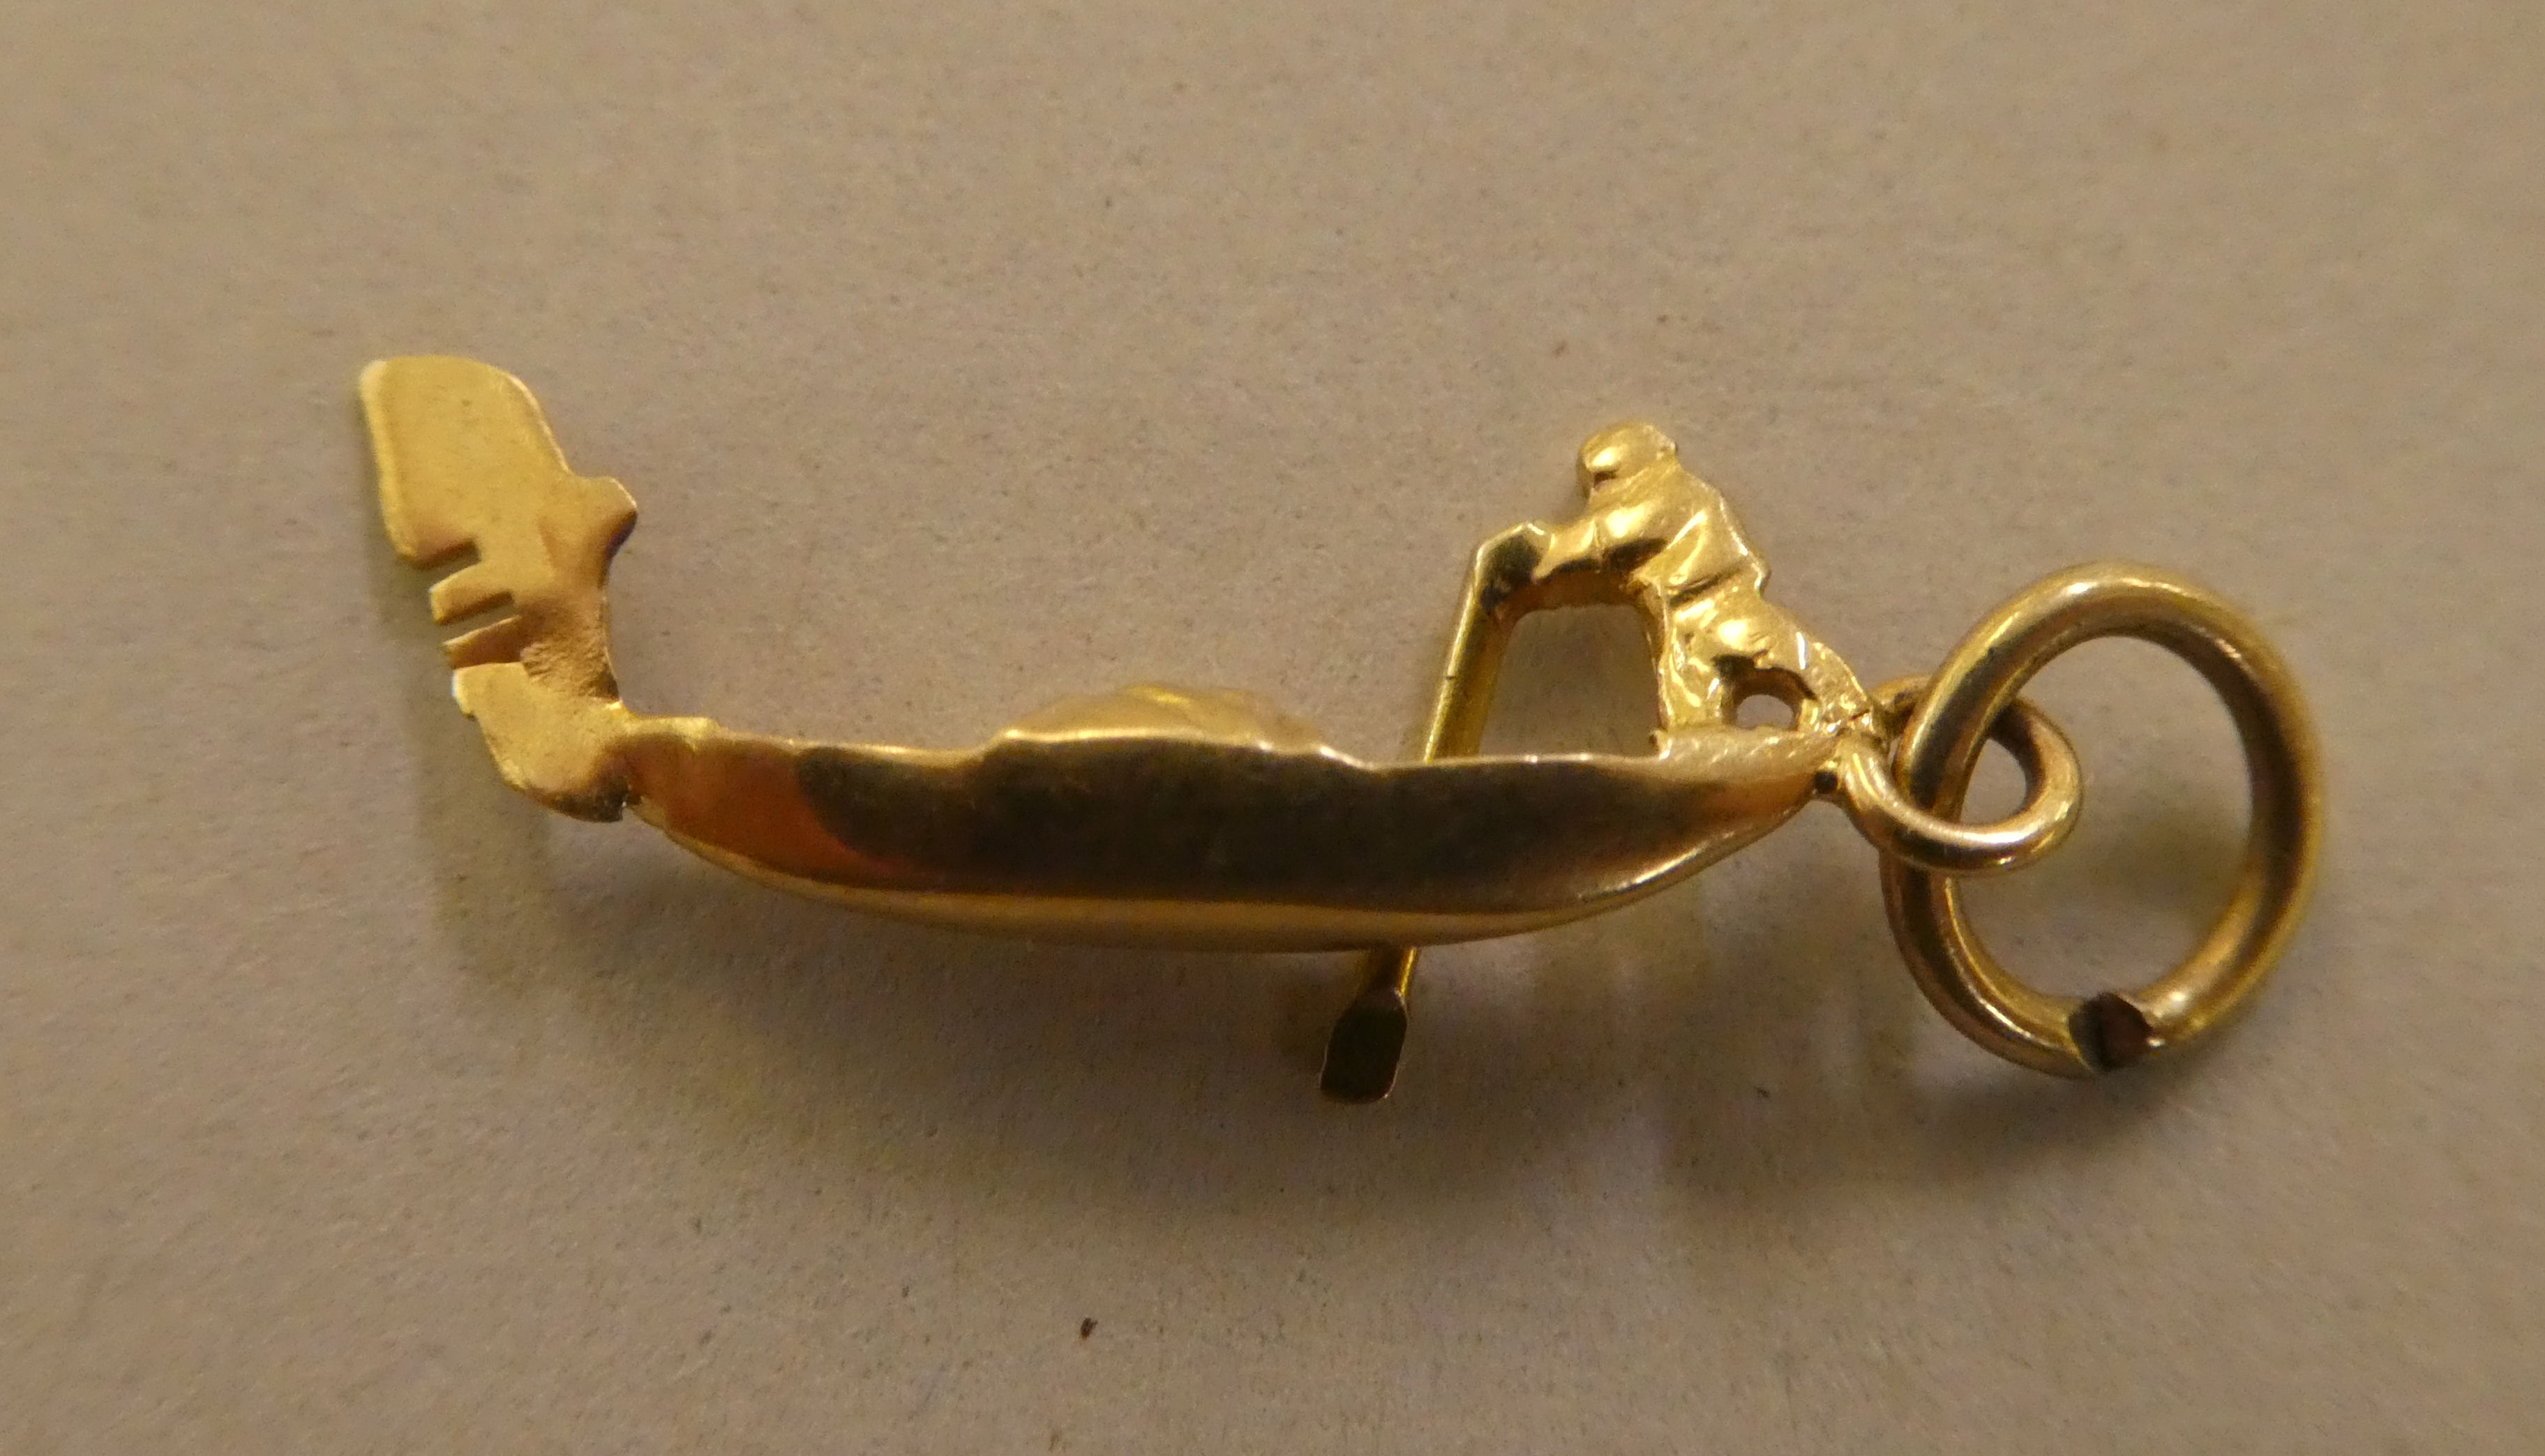 9ct gold, gold coloured and other metal bracelet charms - Image 8 of 9